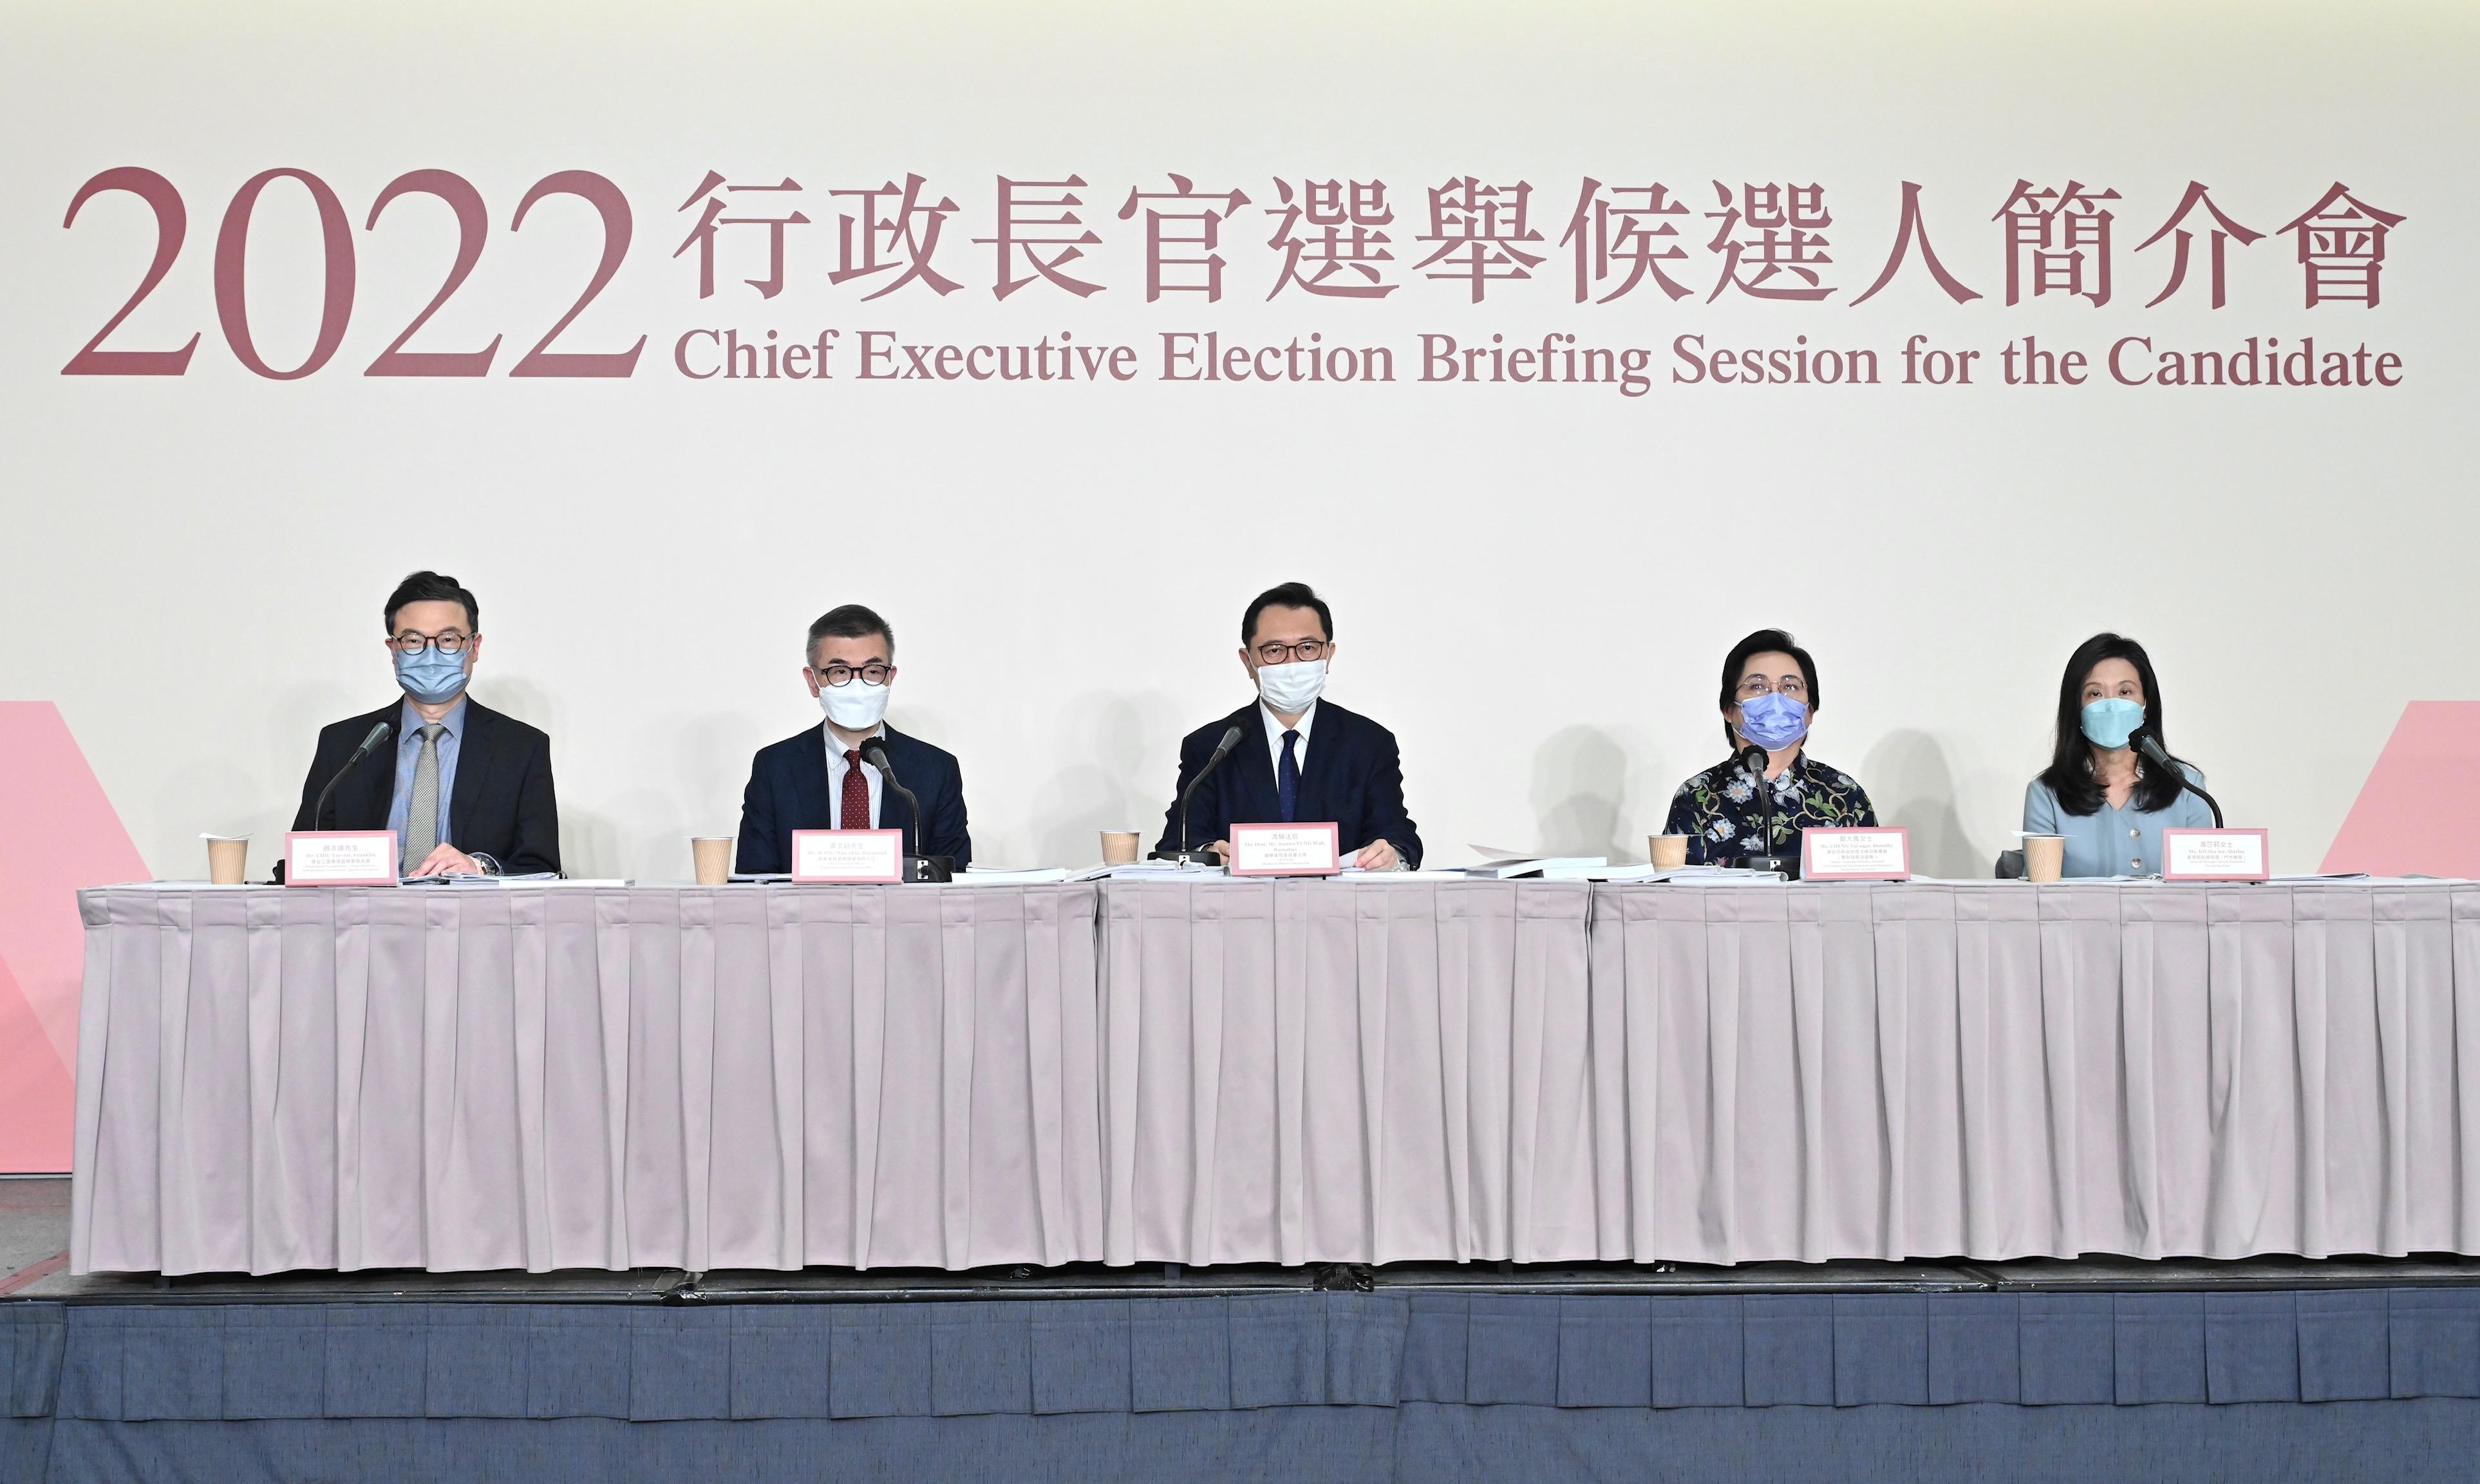 The Chairman of the Electoral Affairs Commission, Mr Justice Barnabas Fung Wah, briefed online the candidate of the 2022 Chief Executive Election and his electioneering team today (April 22) on important points to note in running the election campaign. Pictured (from left) are the Programme Coordinator (Clean Elections) of the Independent Commission Against Corruption, Mr Franklin Chiu; the Chief Electoral Officer of the Registration and Electoral Office, Mr Raymond Wang; Mr Justice Fung; the Senior Assistant Solicitor General (Constitutional Development and Elections) of the Department of Justice, Ms Dorothy Cheng; and the General Manager (Retail Business) of Hongkong Post, Ms Shirley Ko.